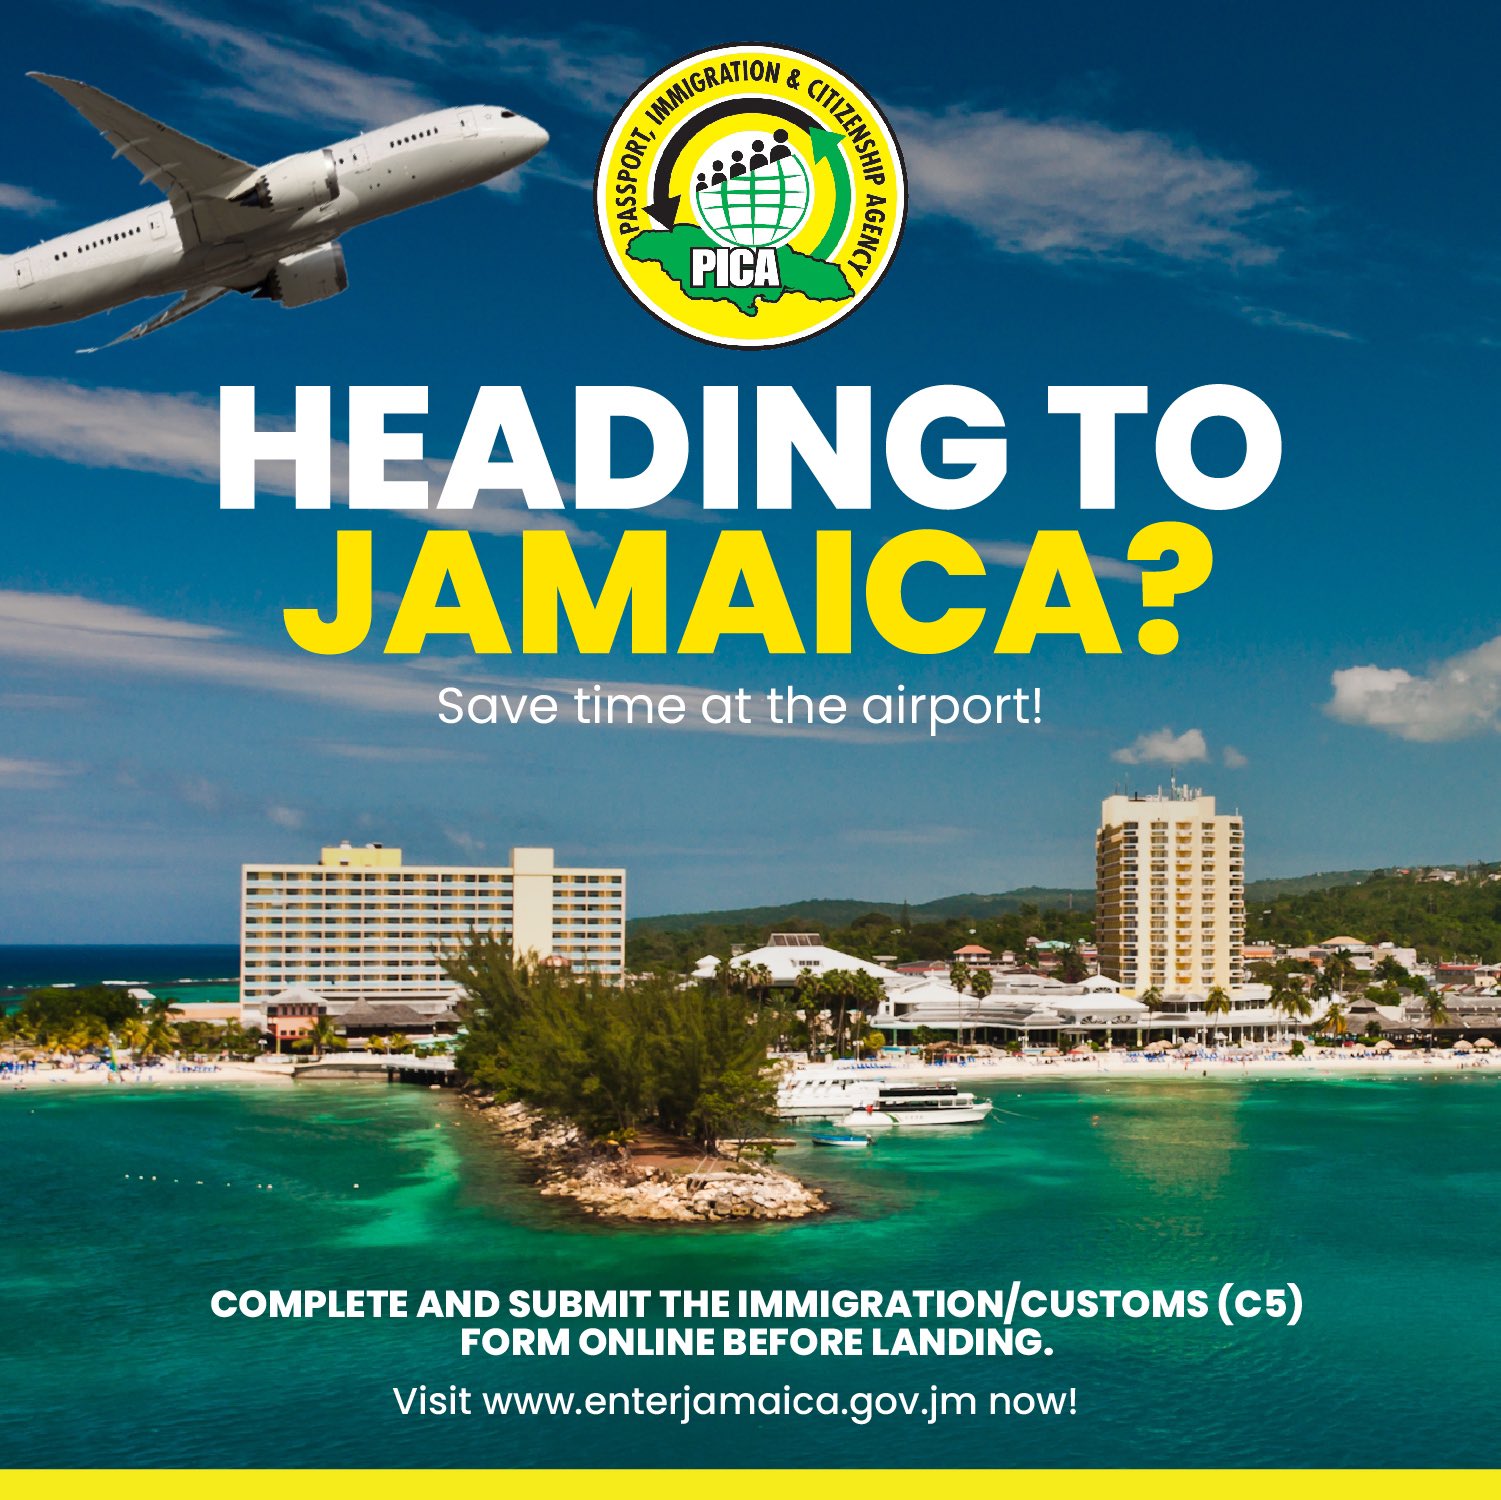 Jamaica Entry Form Guide: Costs, Online Application and C5 Form Completion Tips